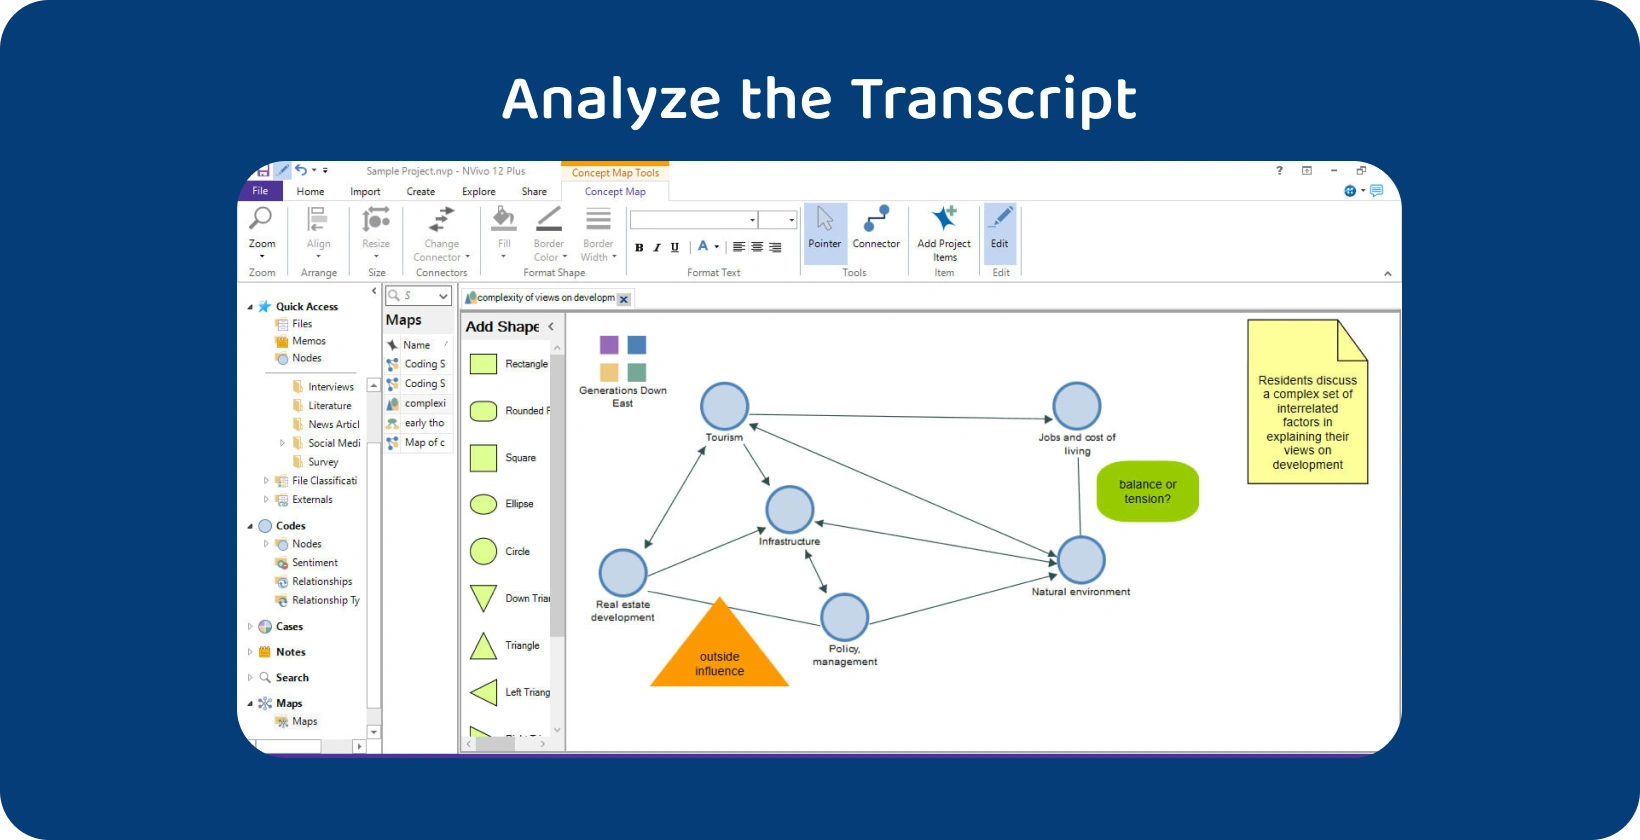 Experience the efficiency of NVivo's transcription service interface, designed for analysis of valuable resources.